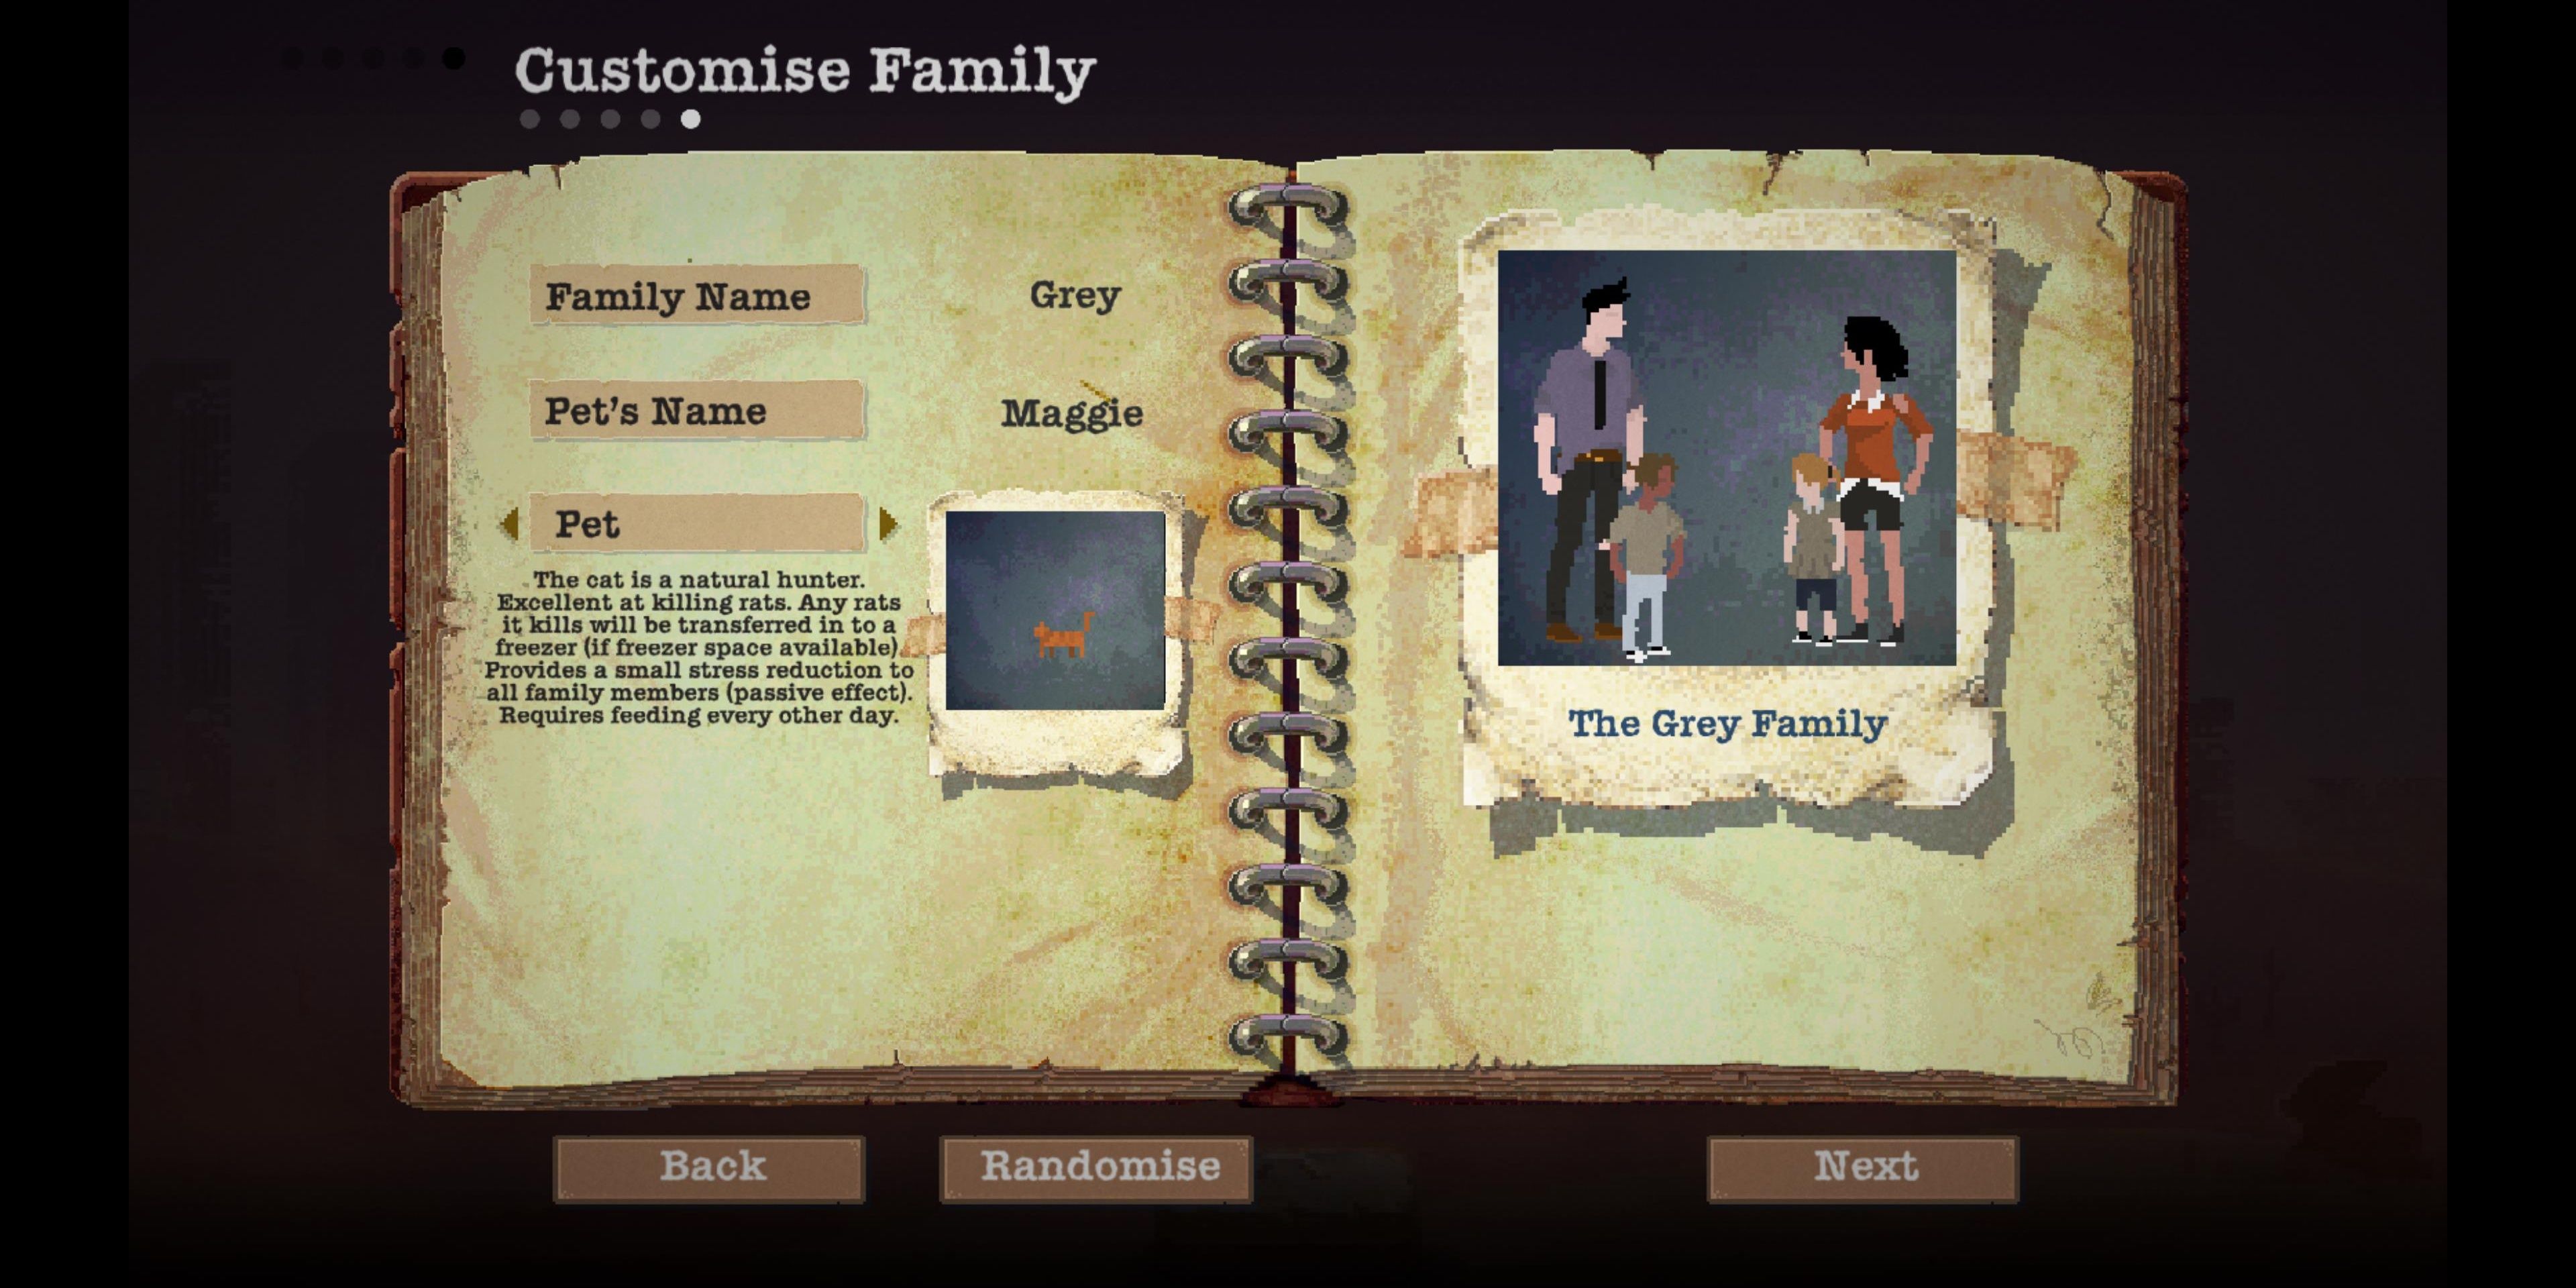 The full description of a family with a cat in Sheltered.